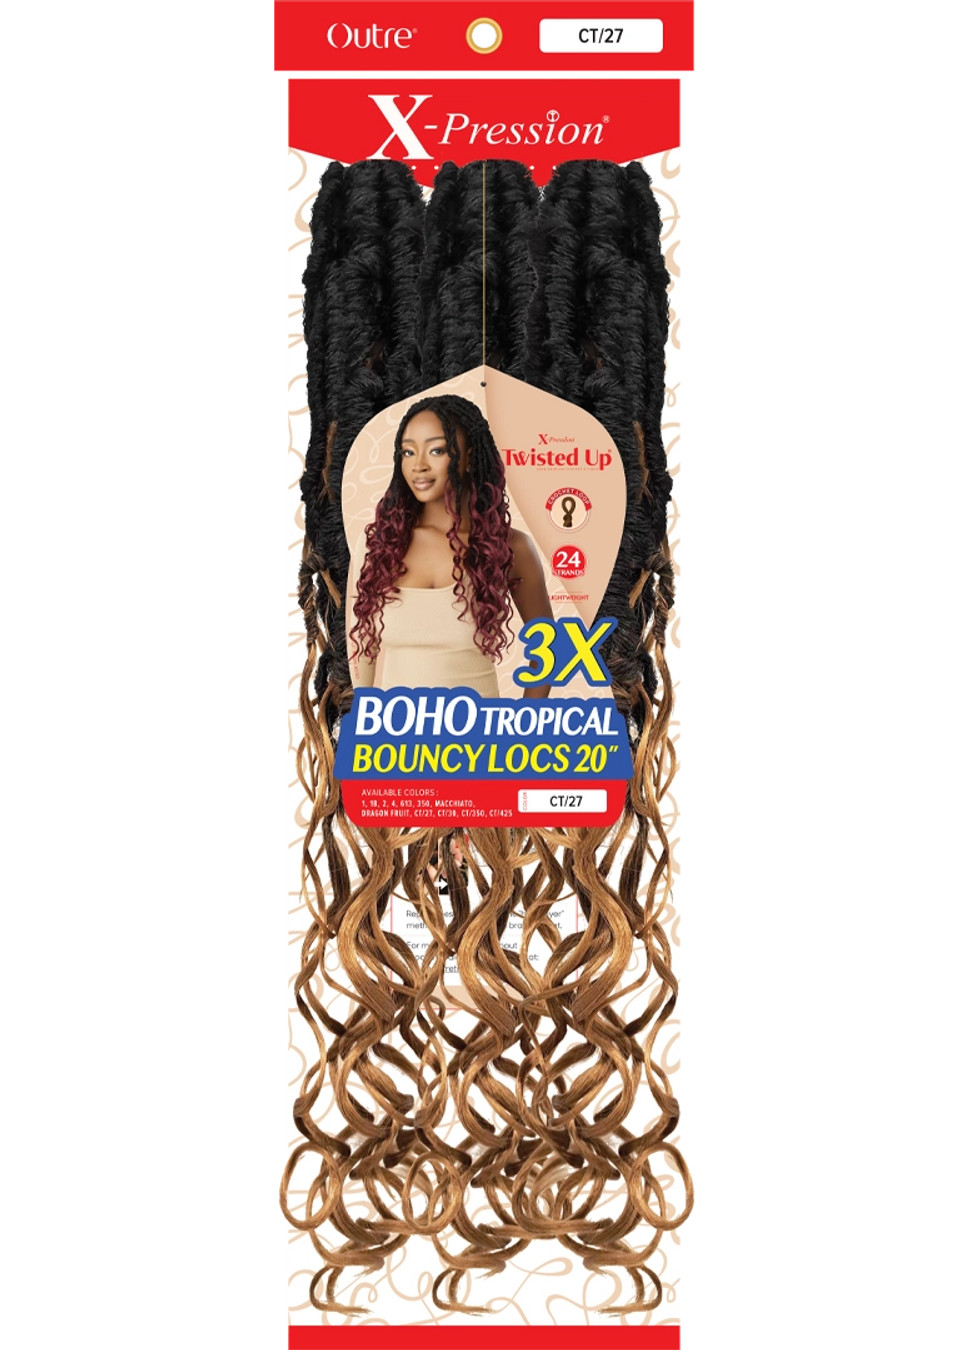 Outre Synthetic X-Pression Twisted Up - 3X Boho Tropical Bouncy Locs 20"